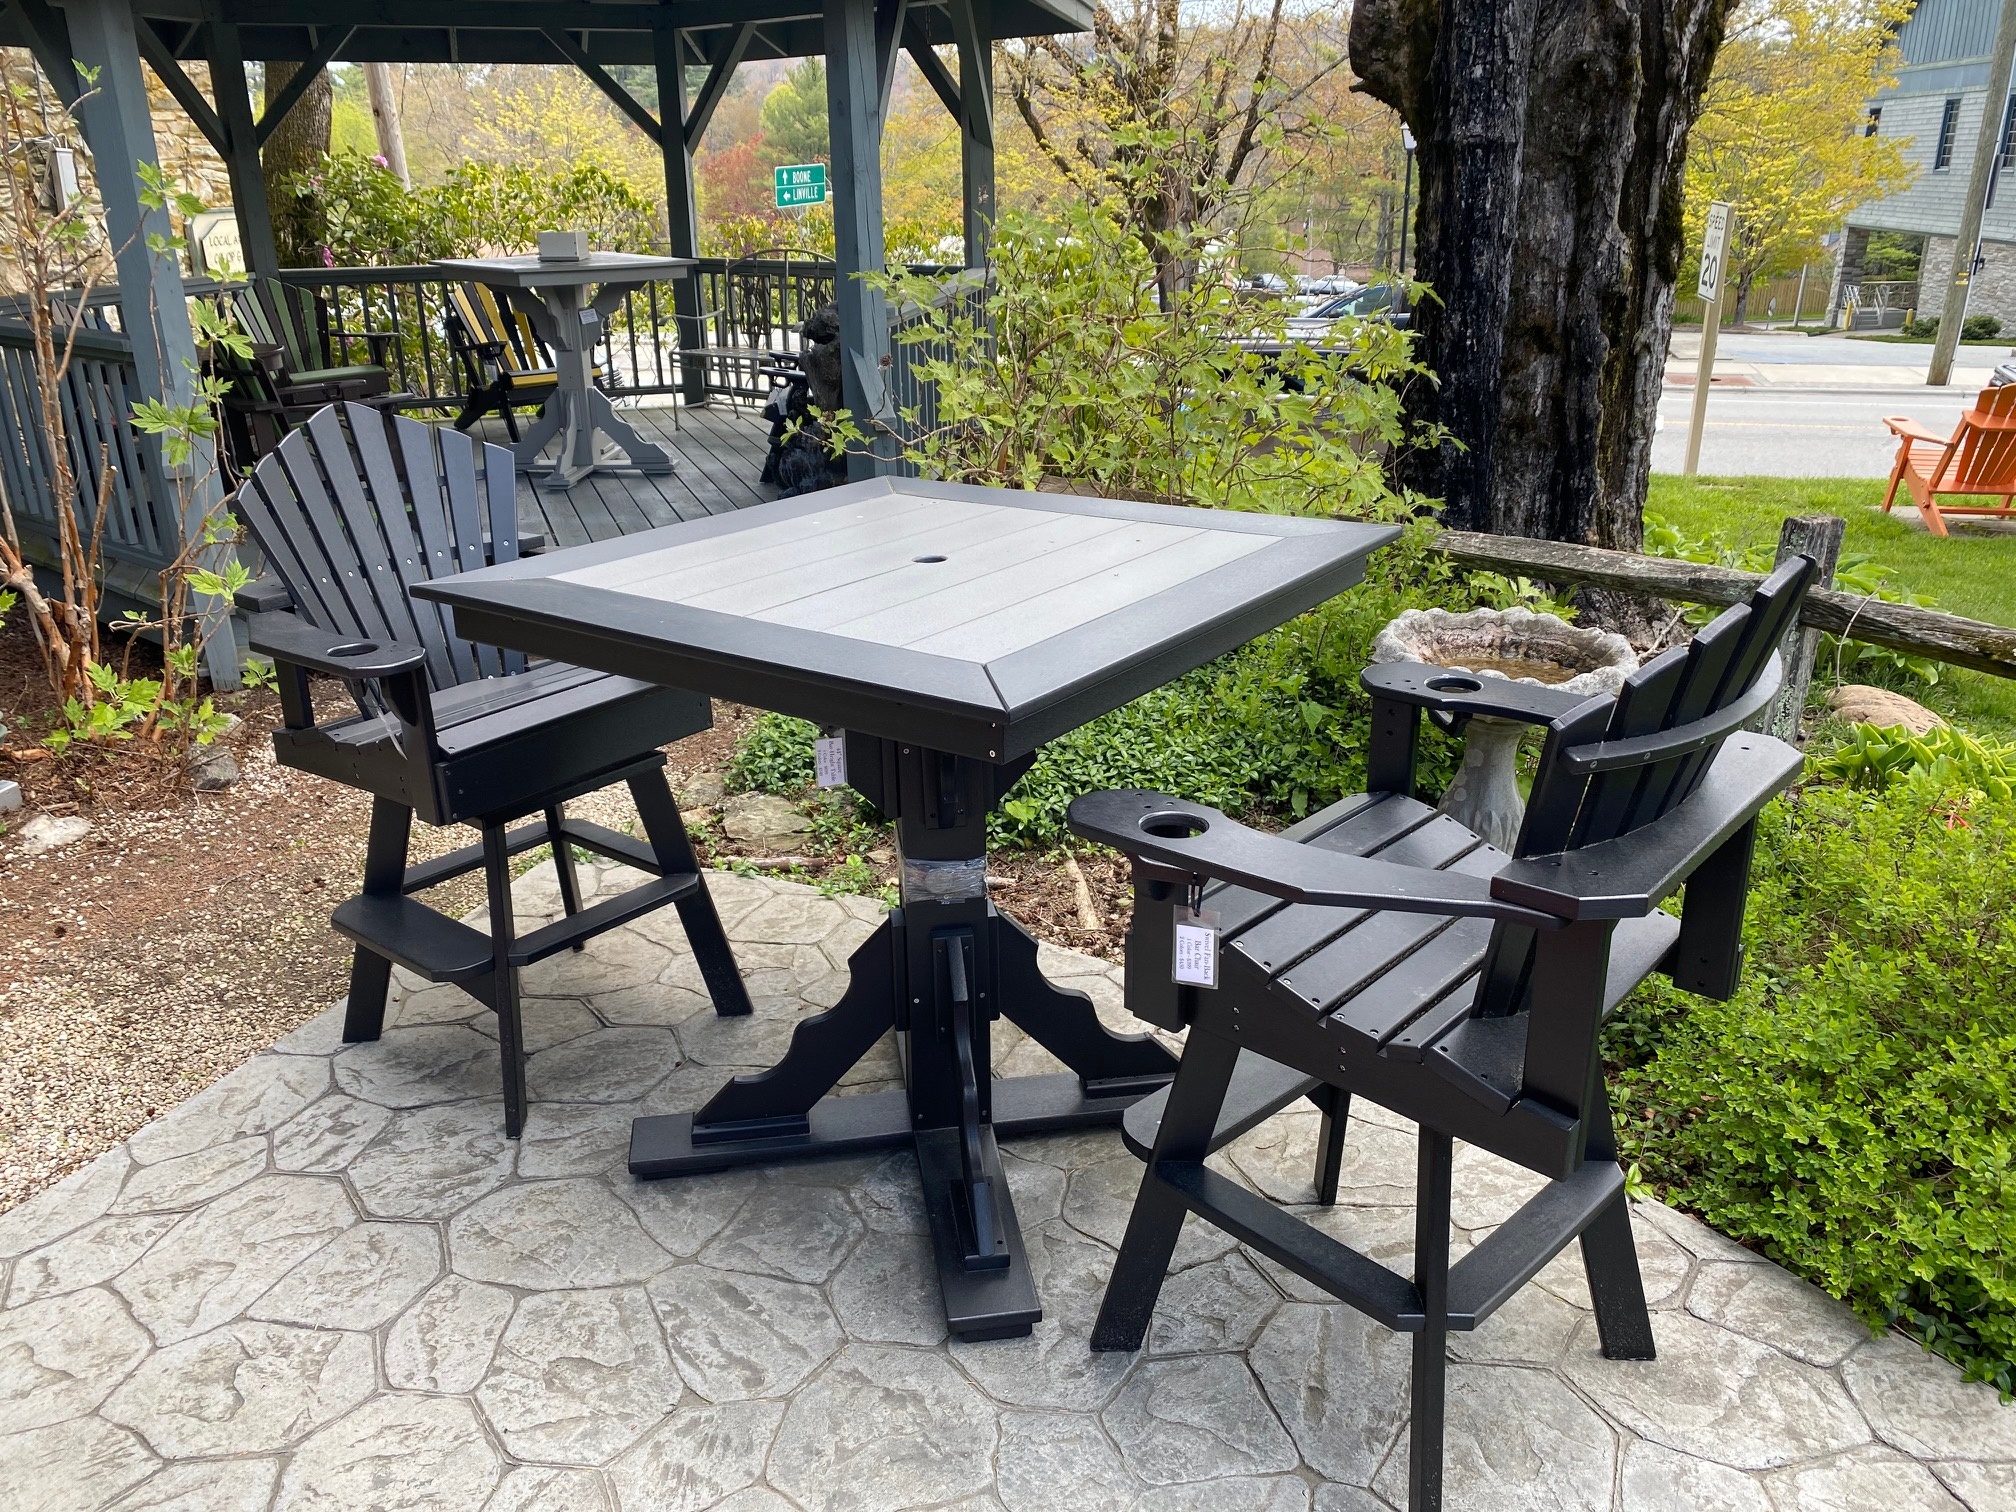 Elevate Your Outdoor Lifestyle with Maintenance-Free, Amish-Made Furniture - A Lasting Investment in Elegance and Quality